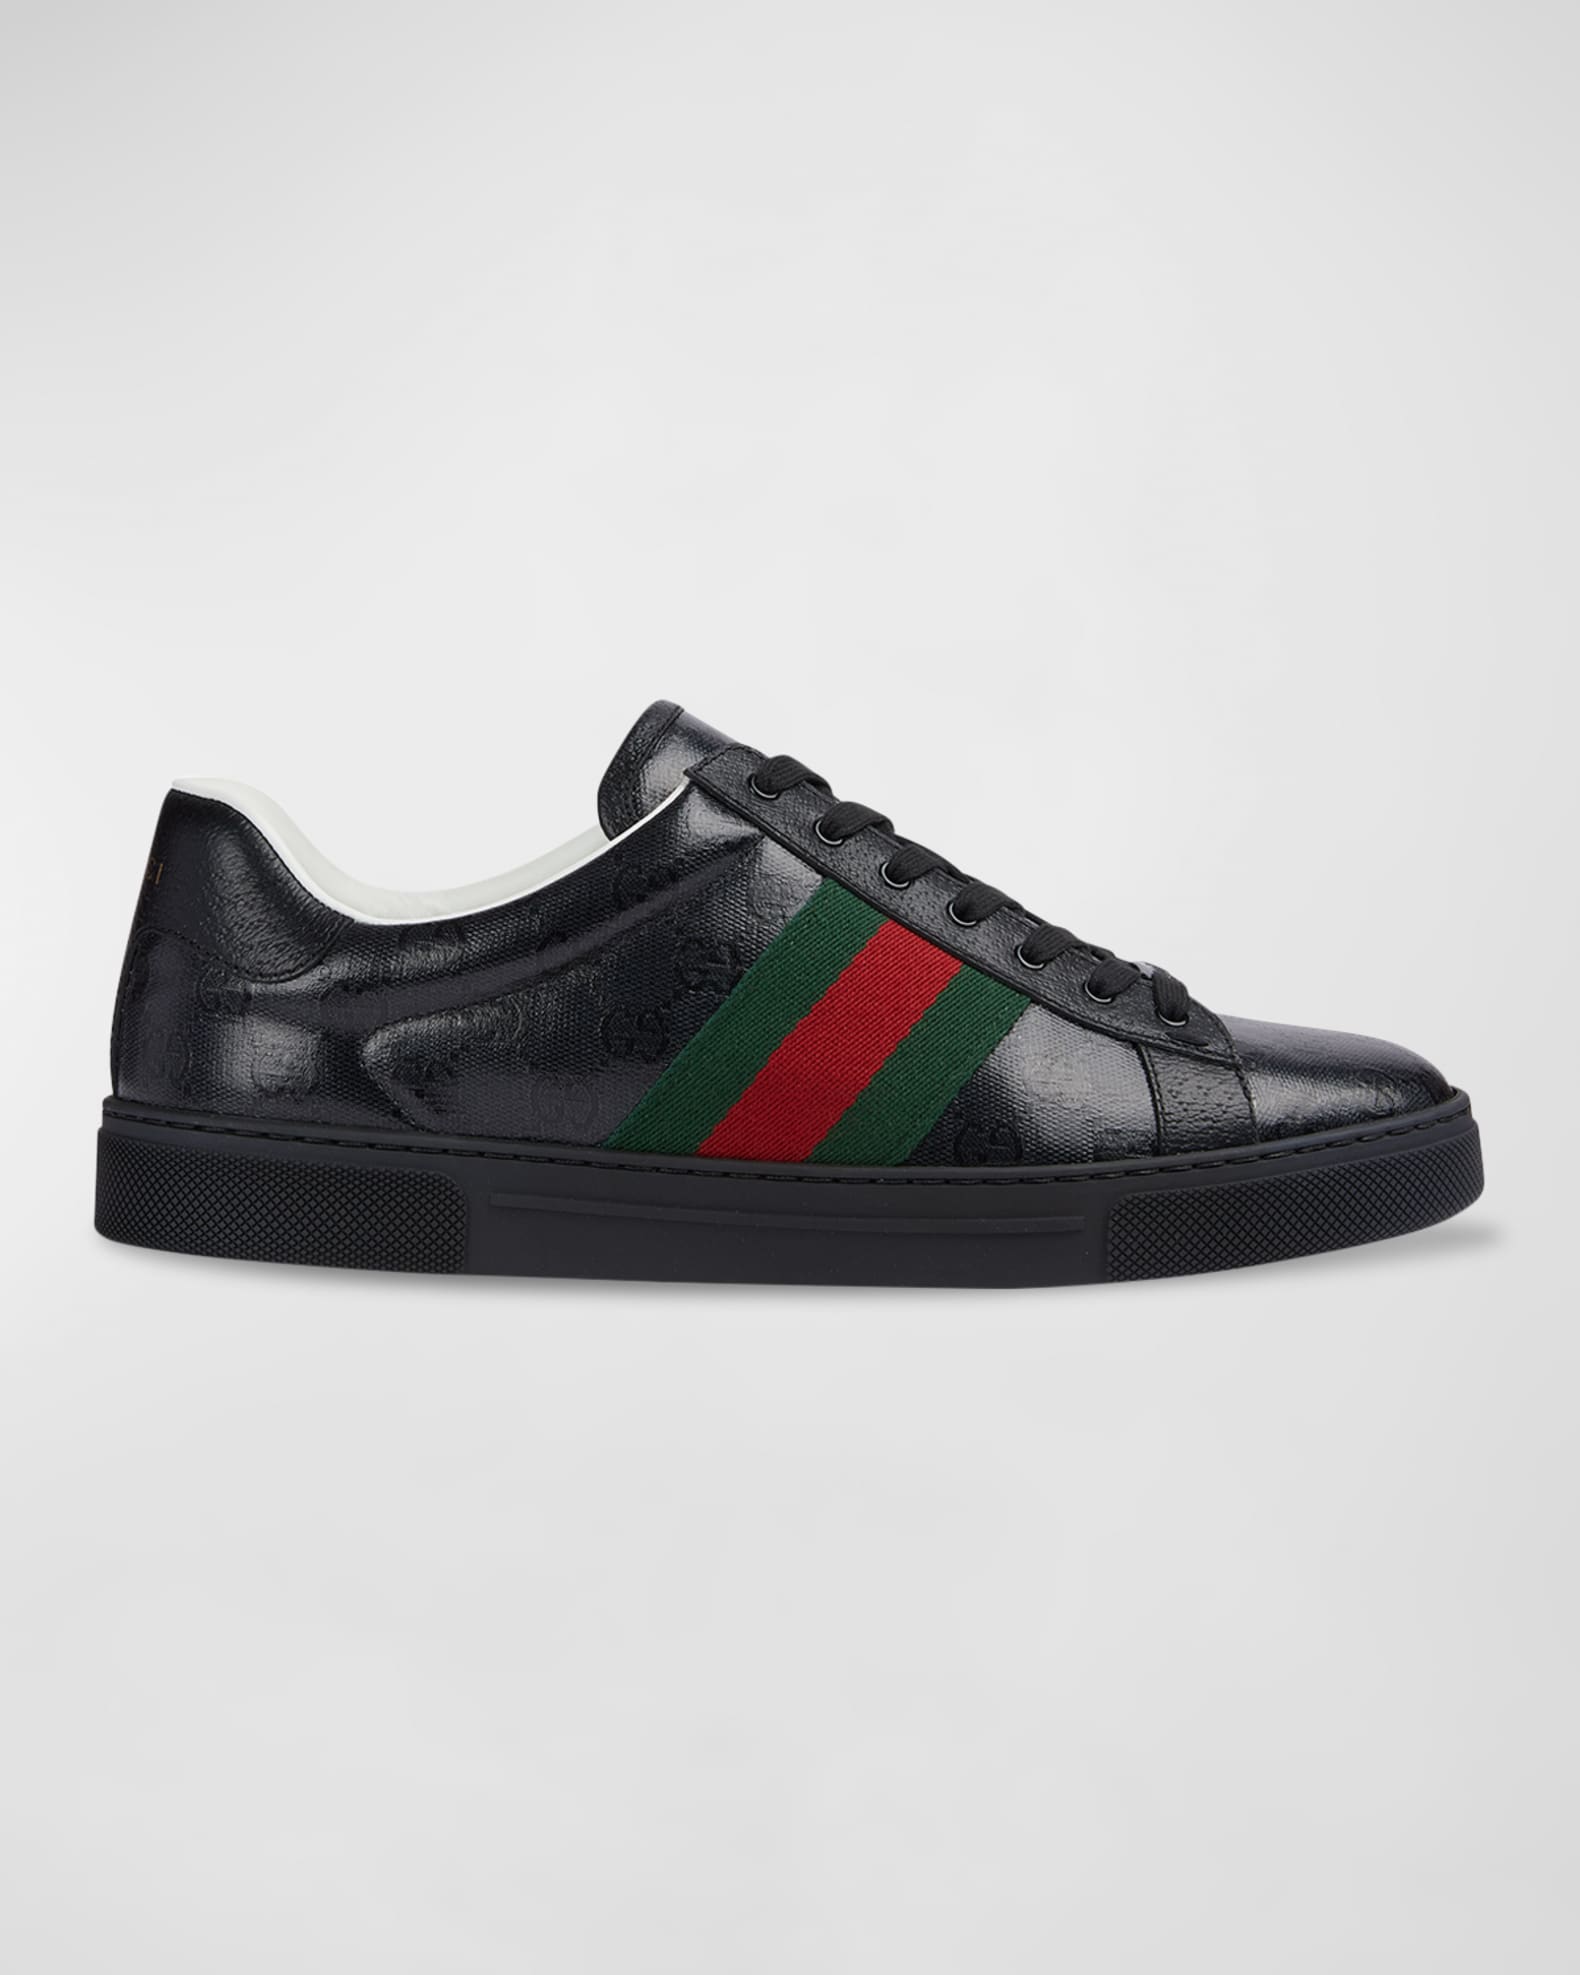 Would you pay $1,590 for these Gucci sneakers?